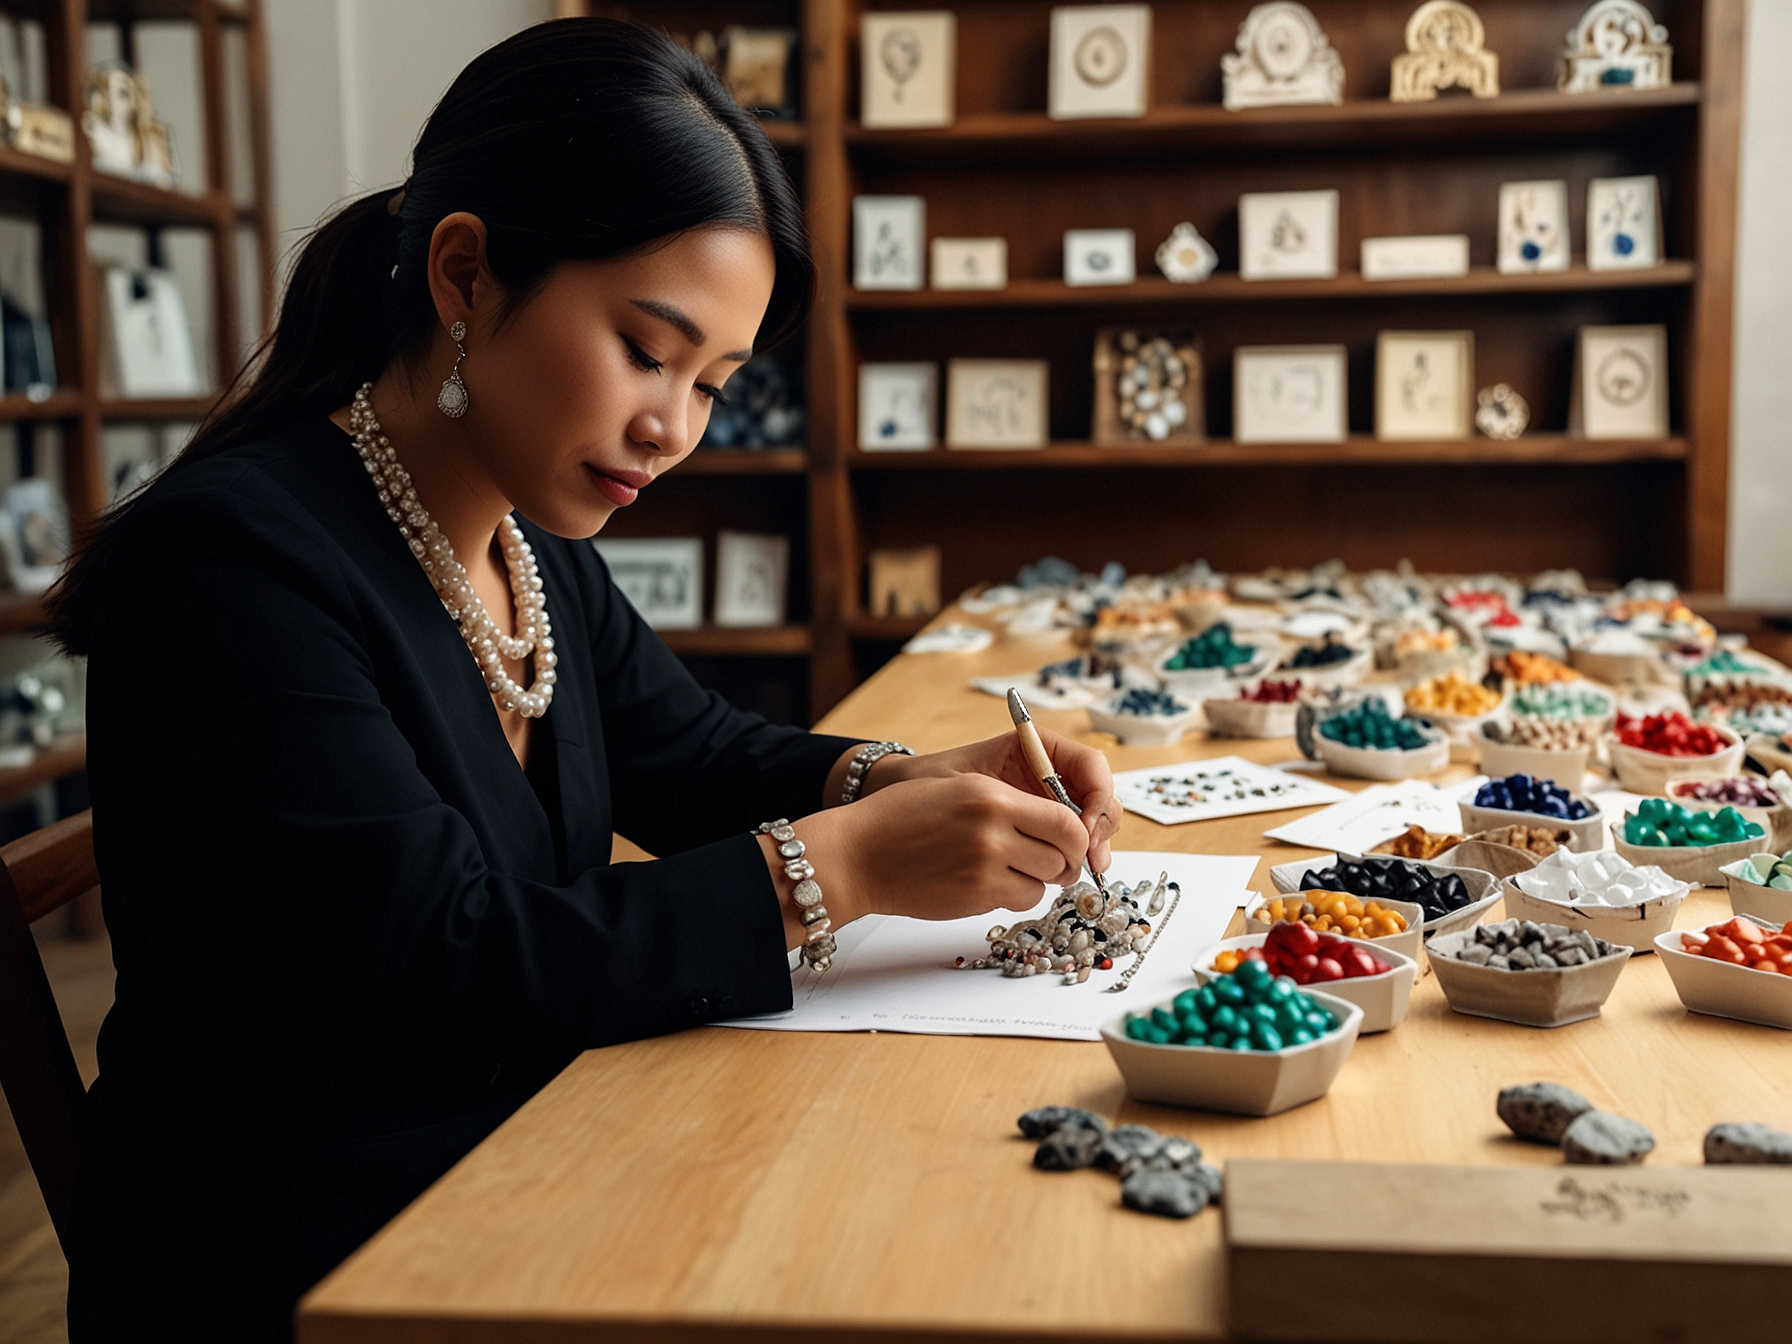 Kat Ong selecting gemstones and pearls with Filipino artisans, showcasing the behind-the-scenes commitment to ethical sourcing and support for traditional craftsmanship in Kislap Jewelry.